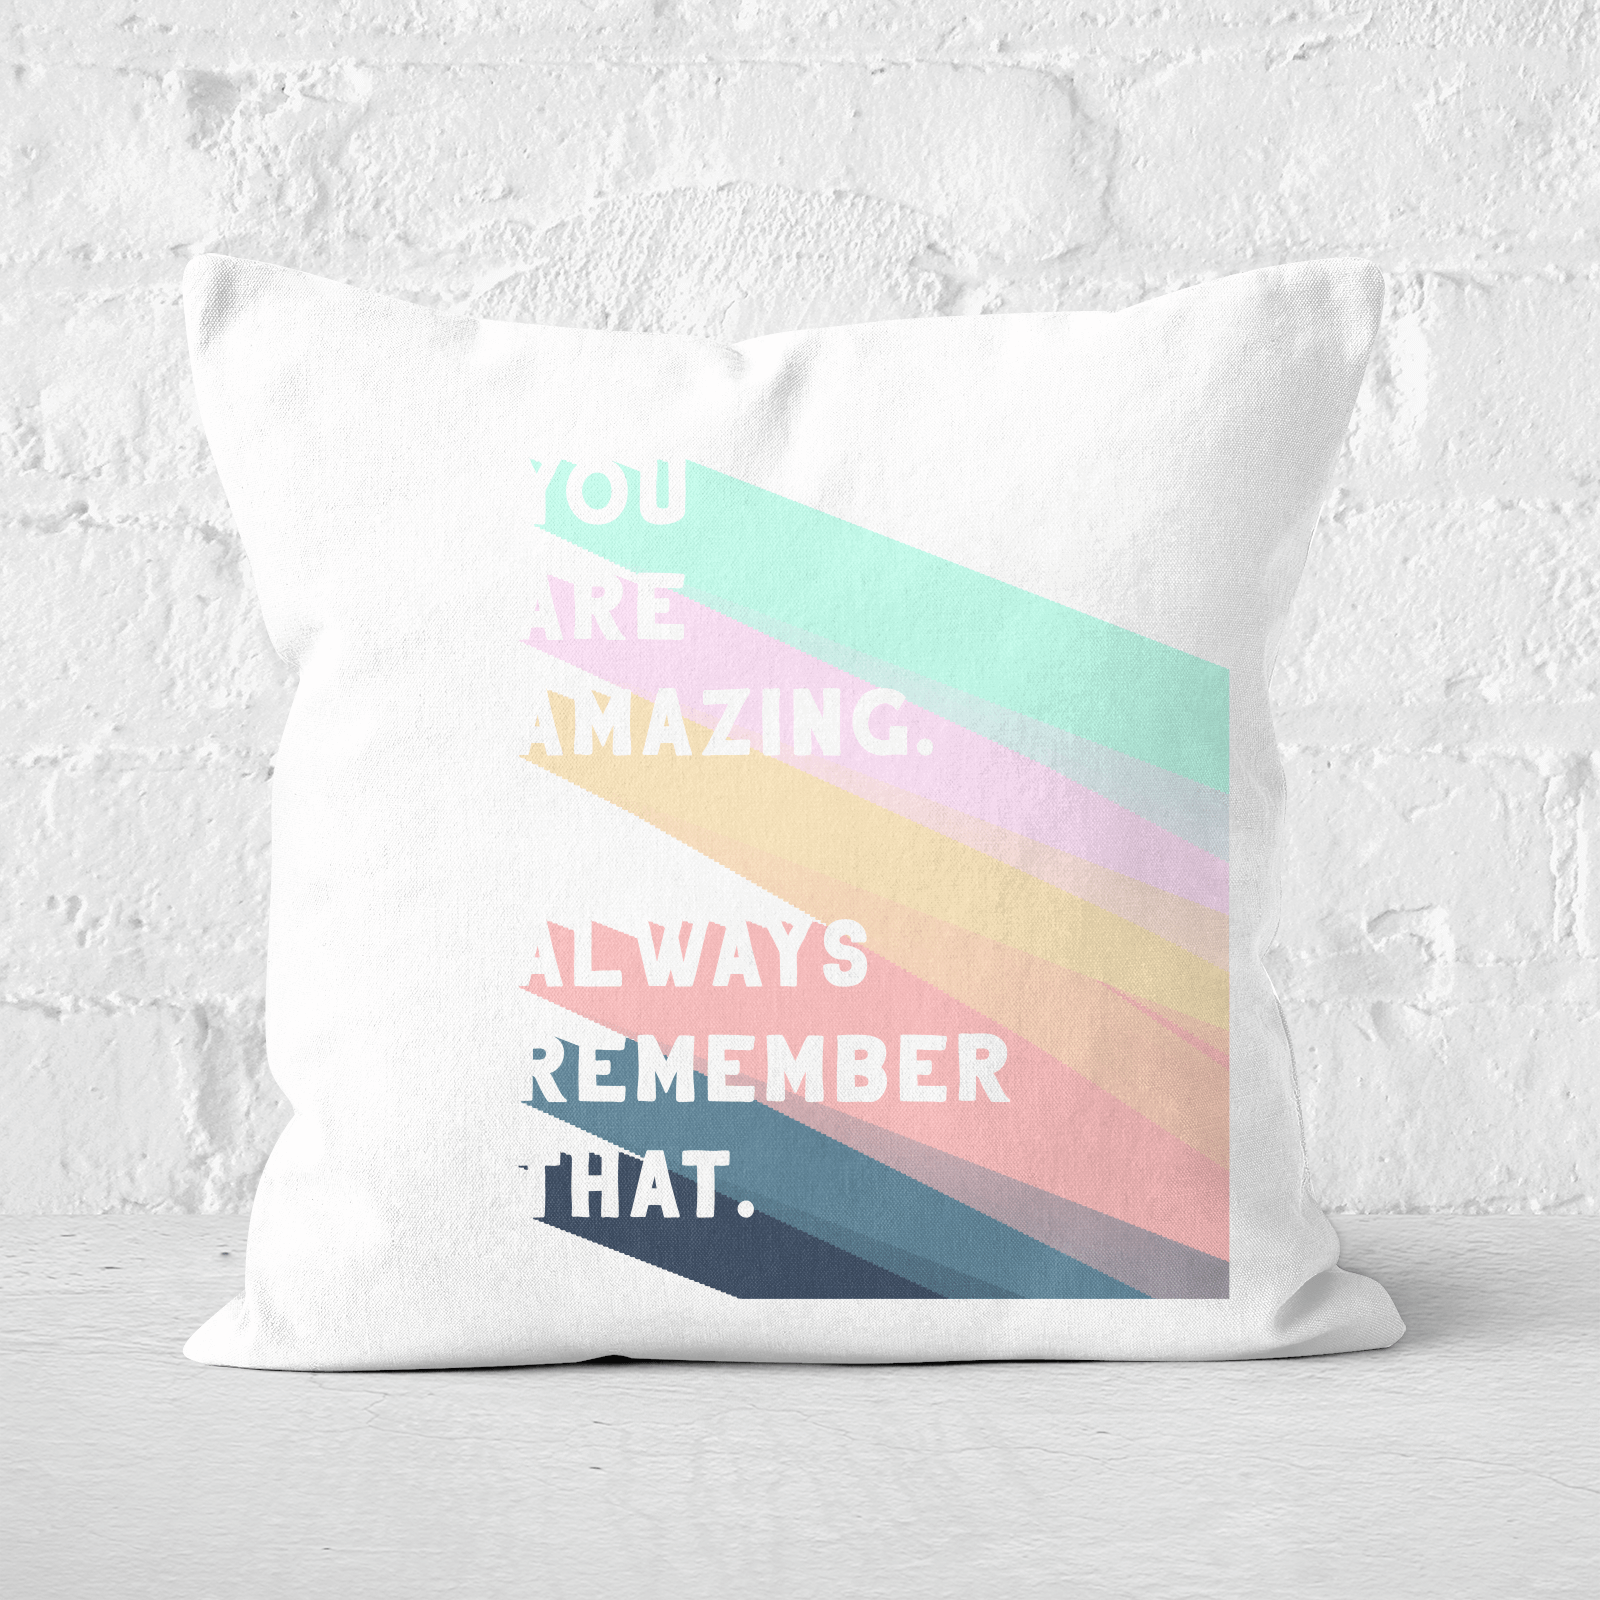 You Are Amazing Square Cushion - 60x60cm - Soft Touch